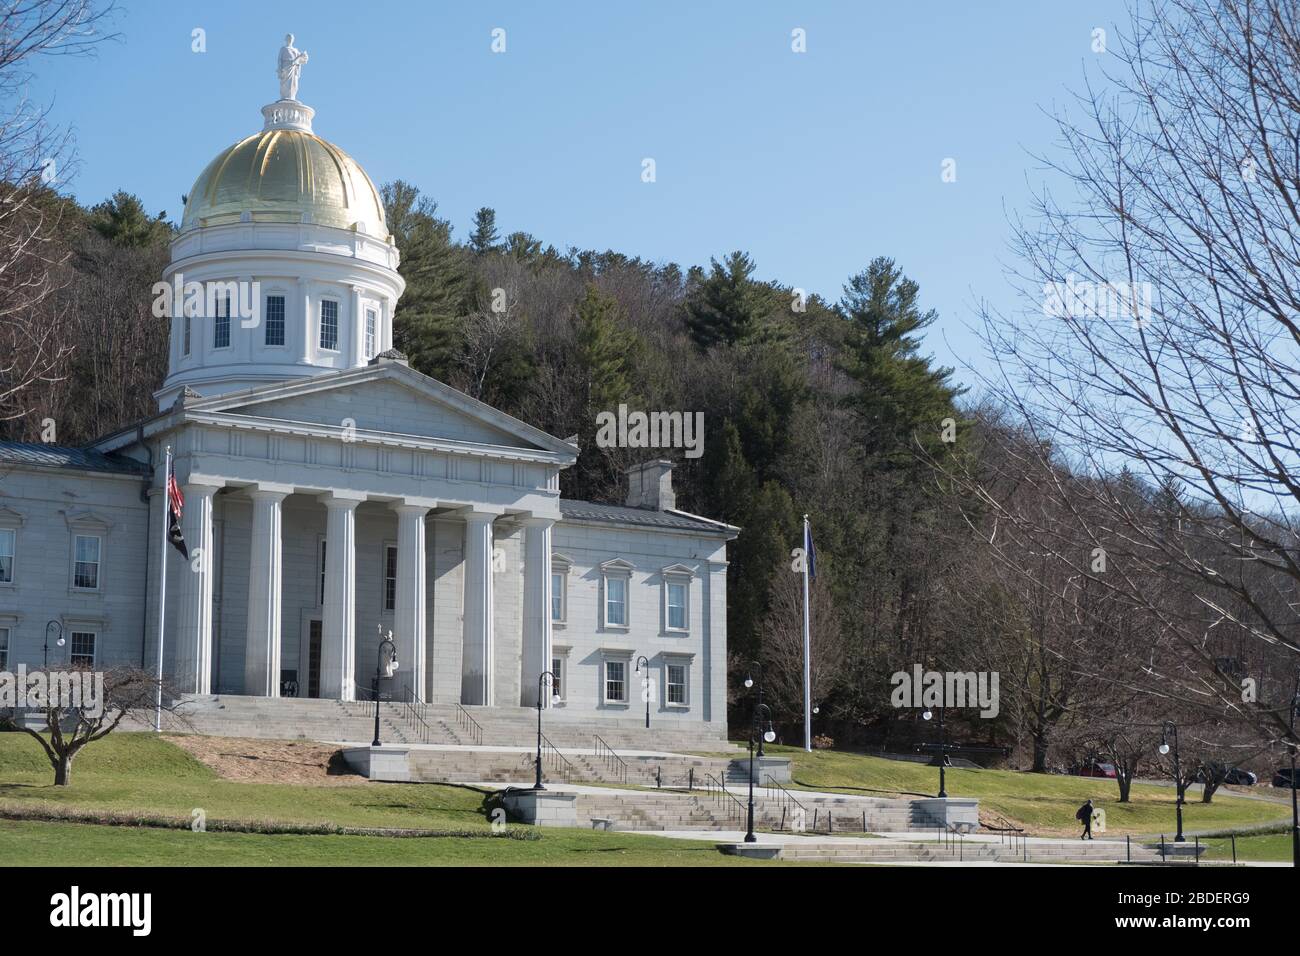 Vermont State House, Montpelier, VT, USA, capital of Vermont, during stay-at-home order sees deserted streets and social distancing downtown. Stock Photo